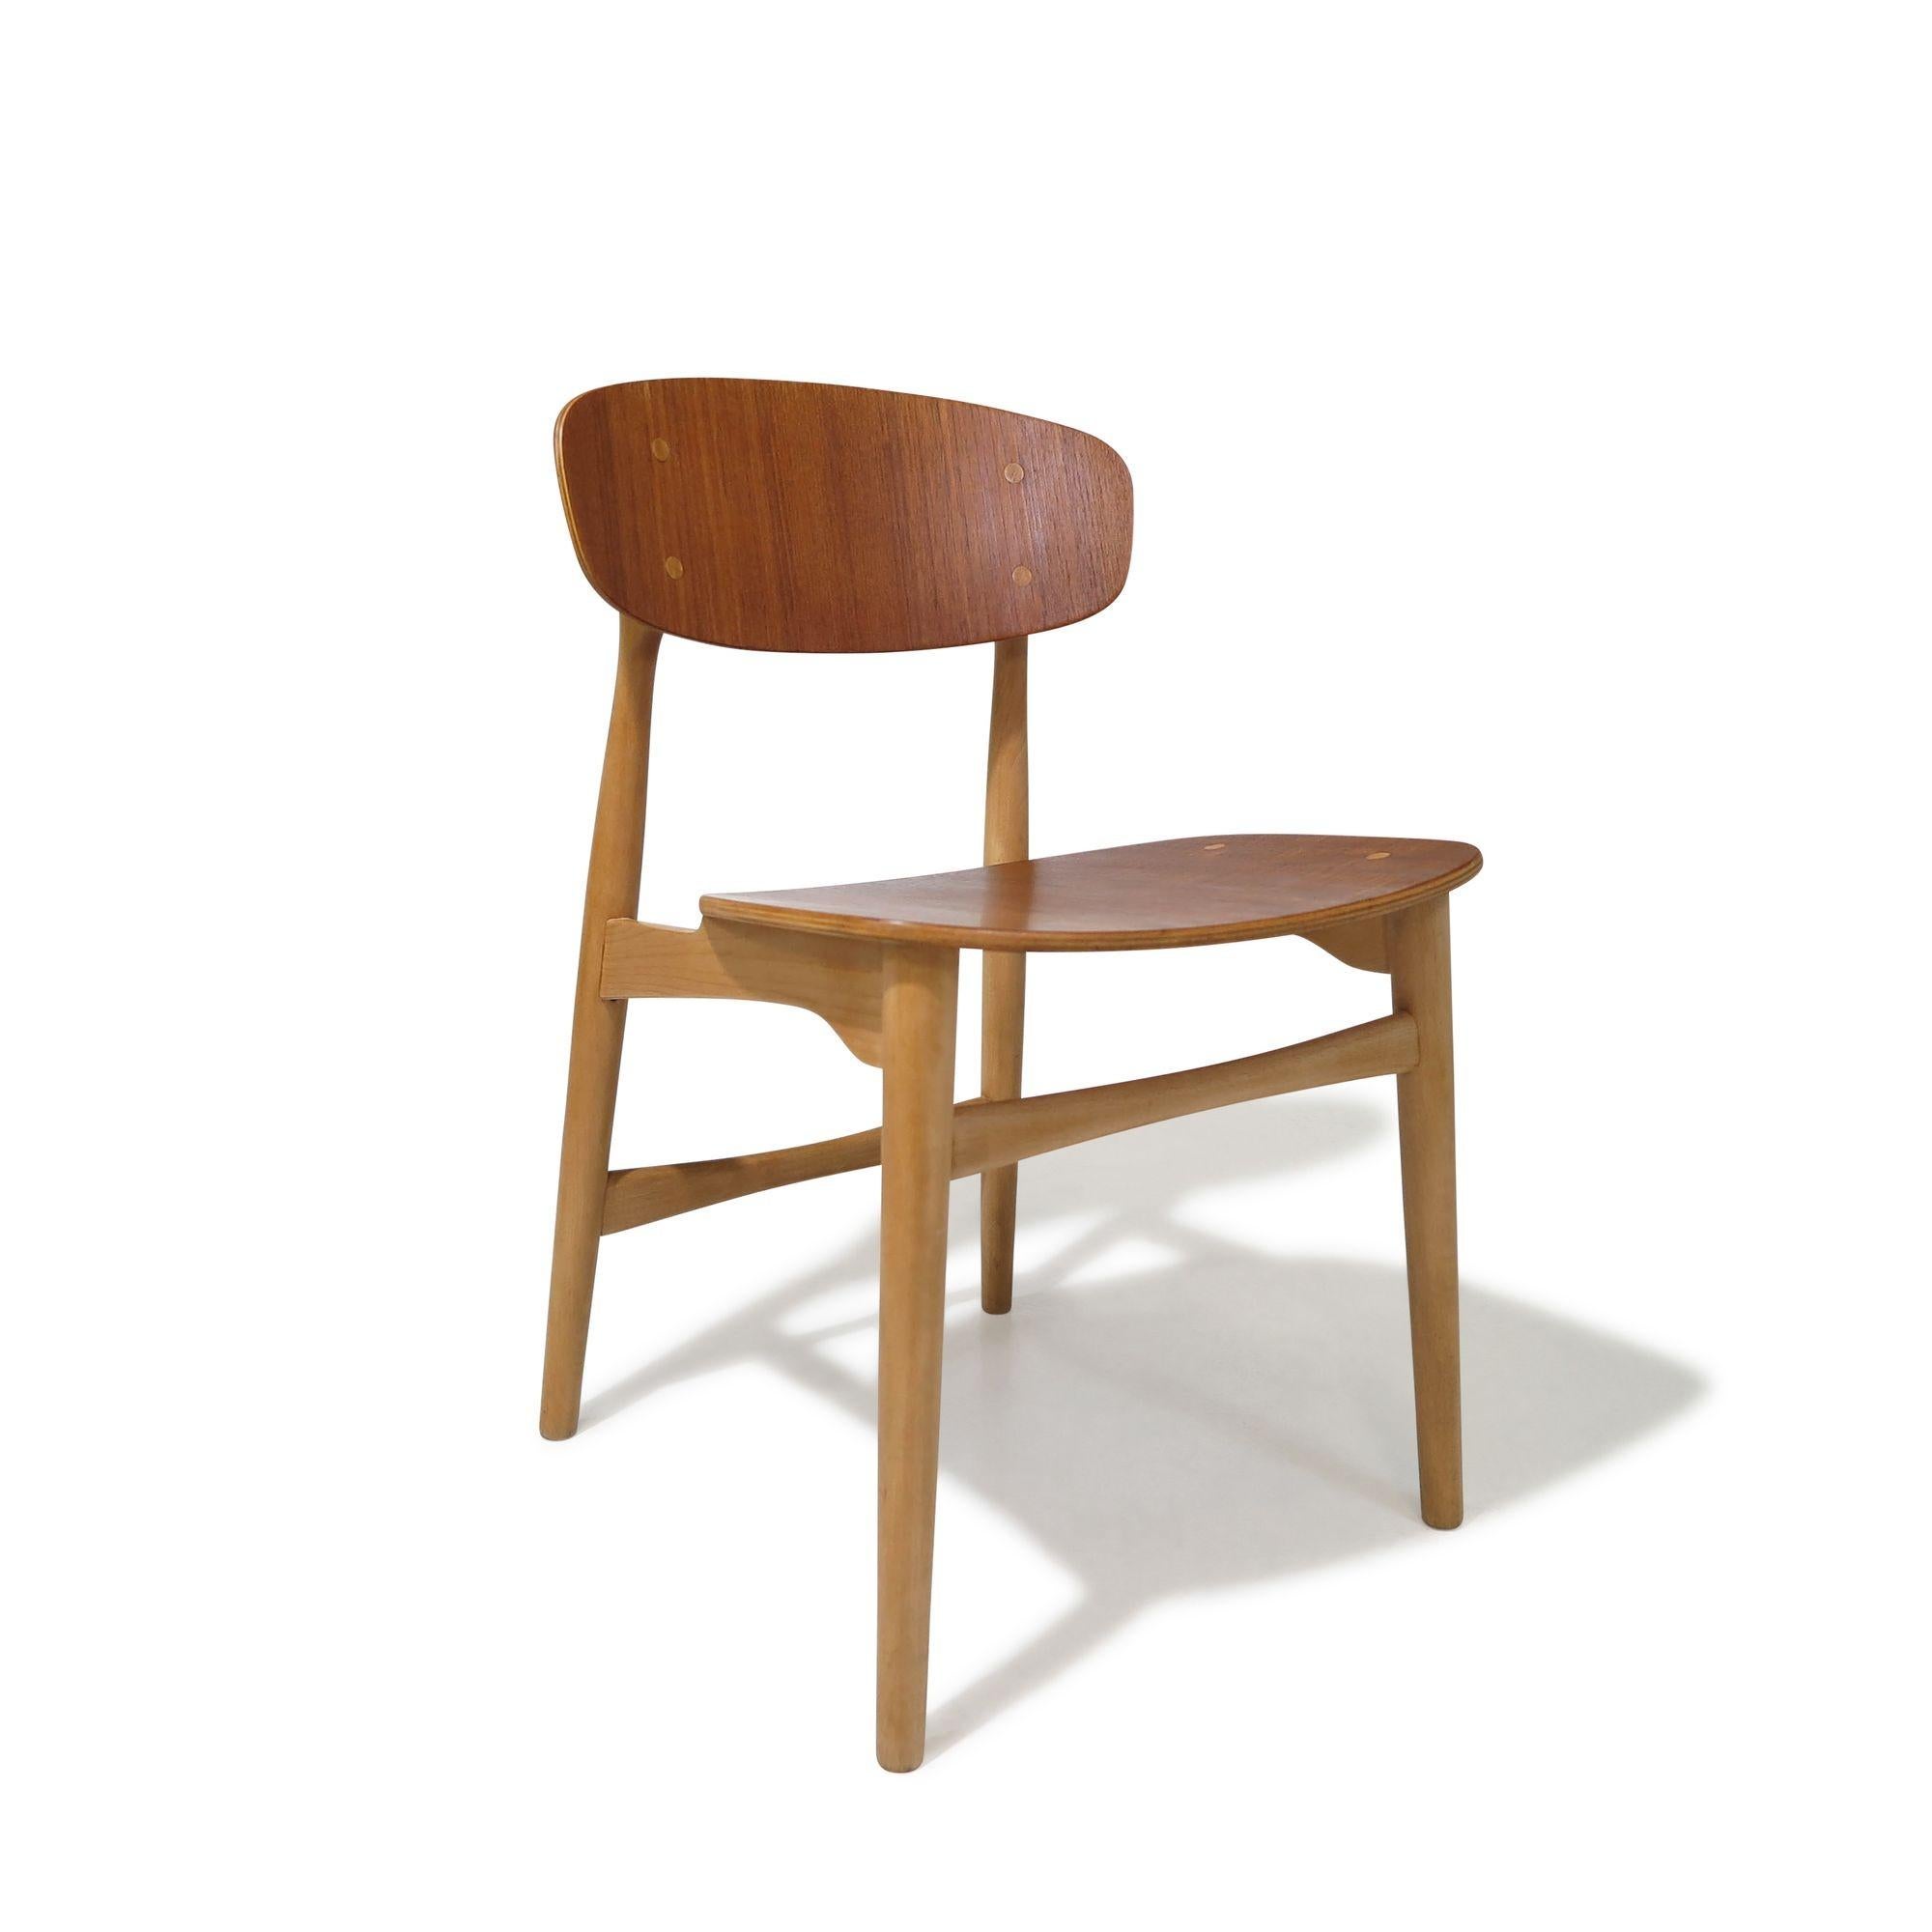 Mid-century Danish dining chairs designed by Jens Hjorth and manufactured by Randers Stolefabrik, Model 308, Denmark, circa 1954. Crafted from solid beech frames with a wax finish and oiled teak backs. The chairs feature curved seats and teak back